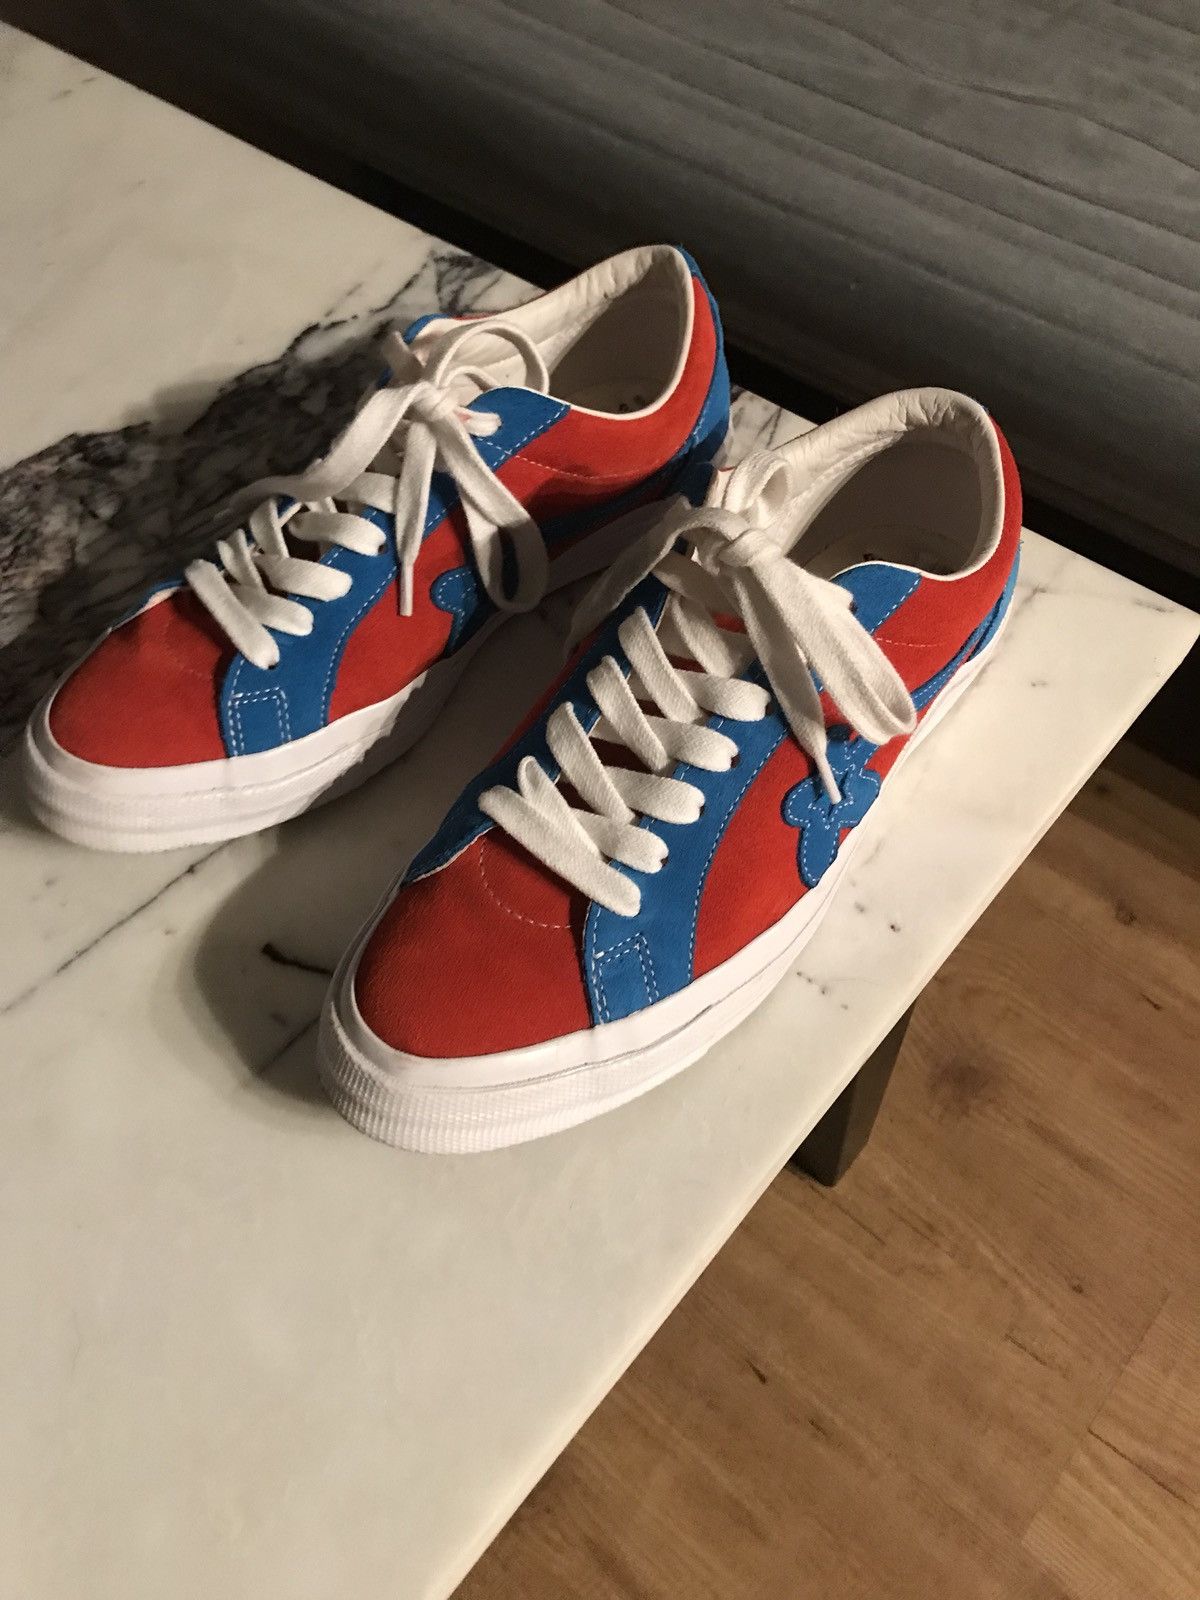 Converse Golf Le Fleur Red And Blue Spiderman Colorway | Grailed